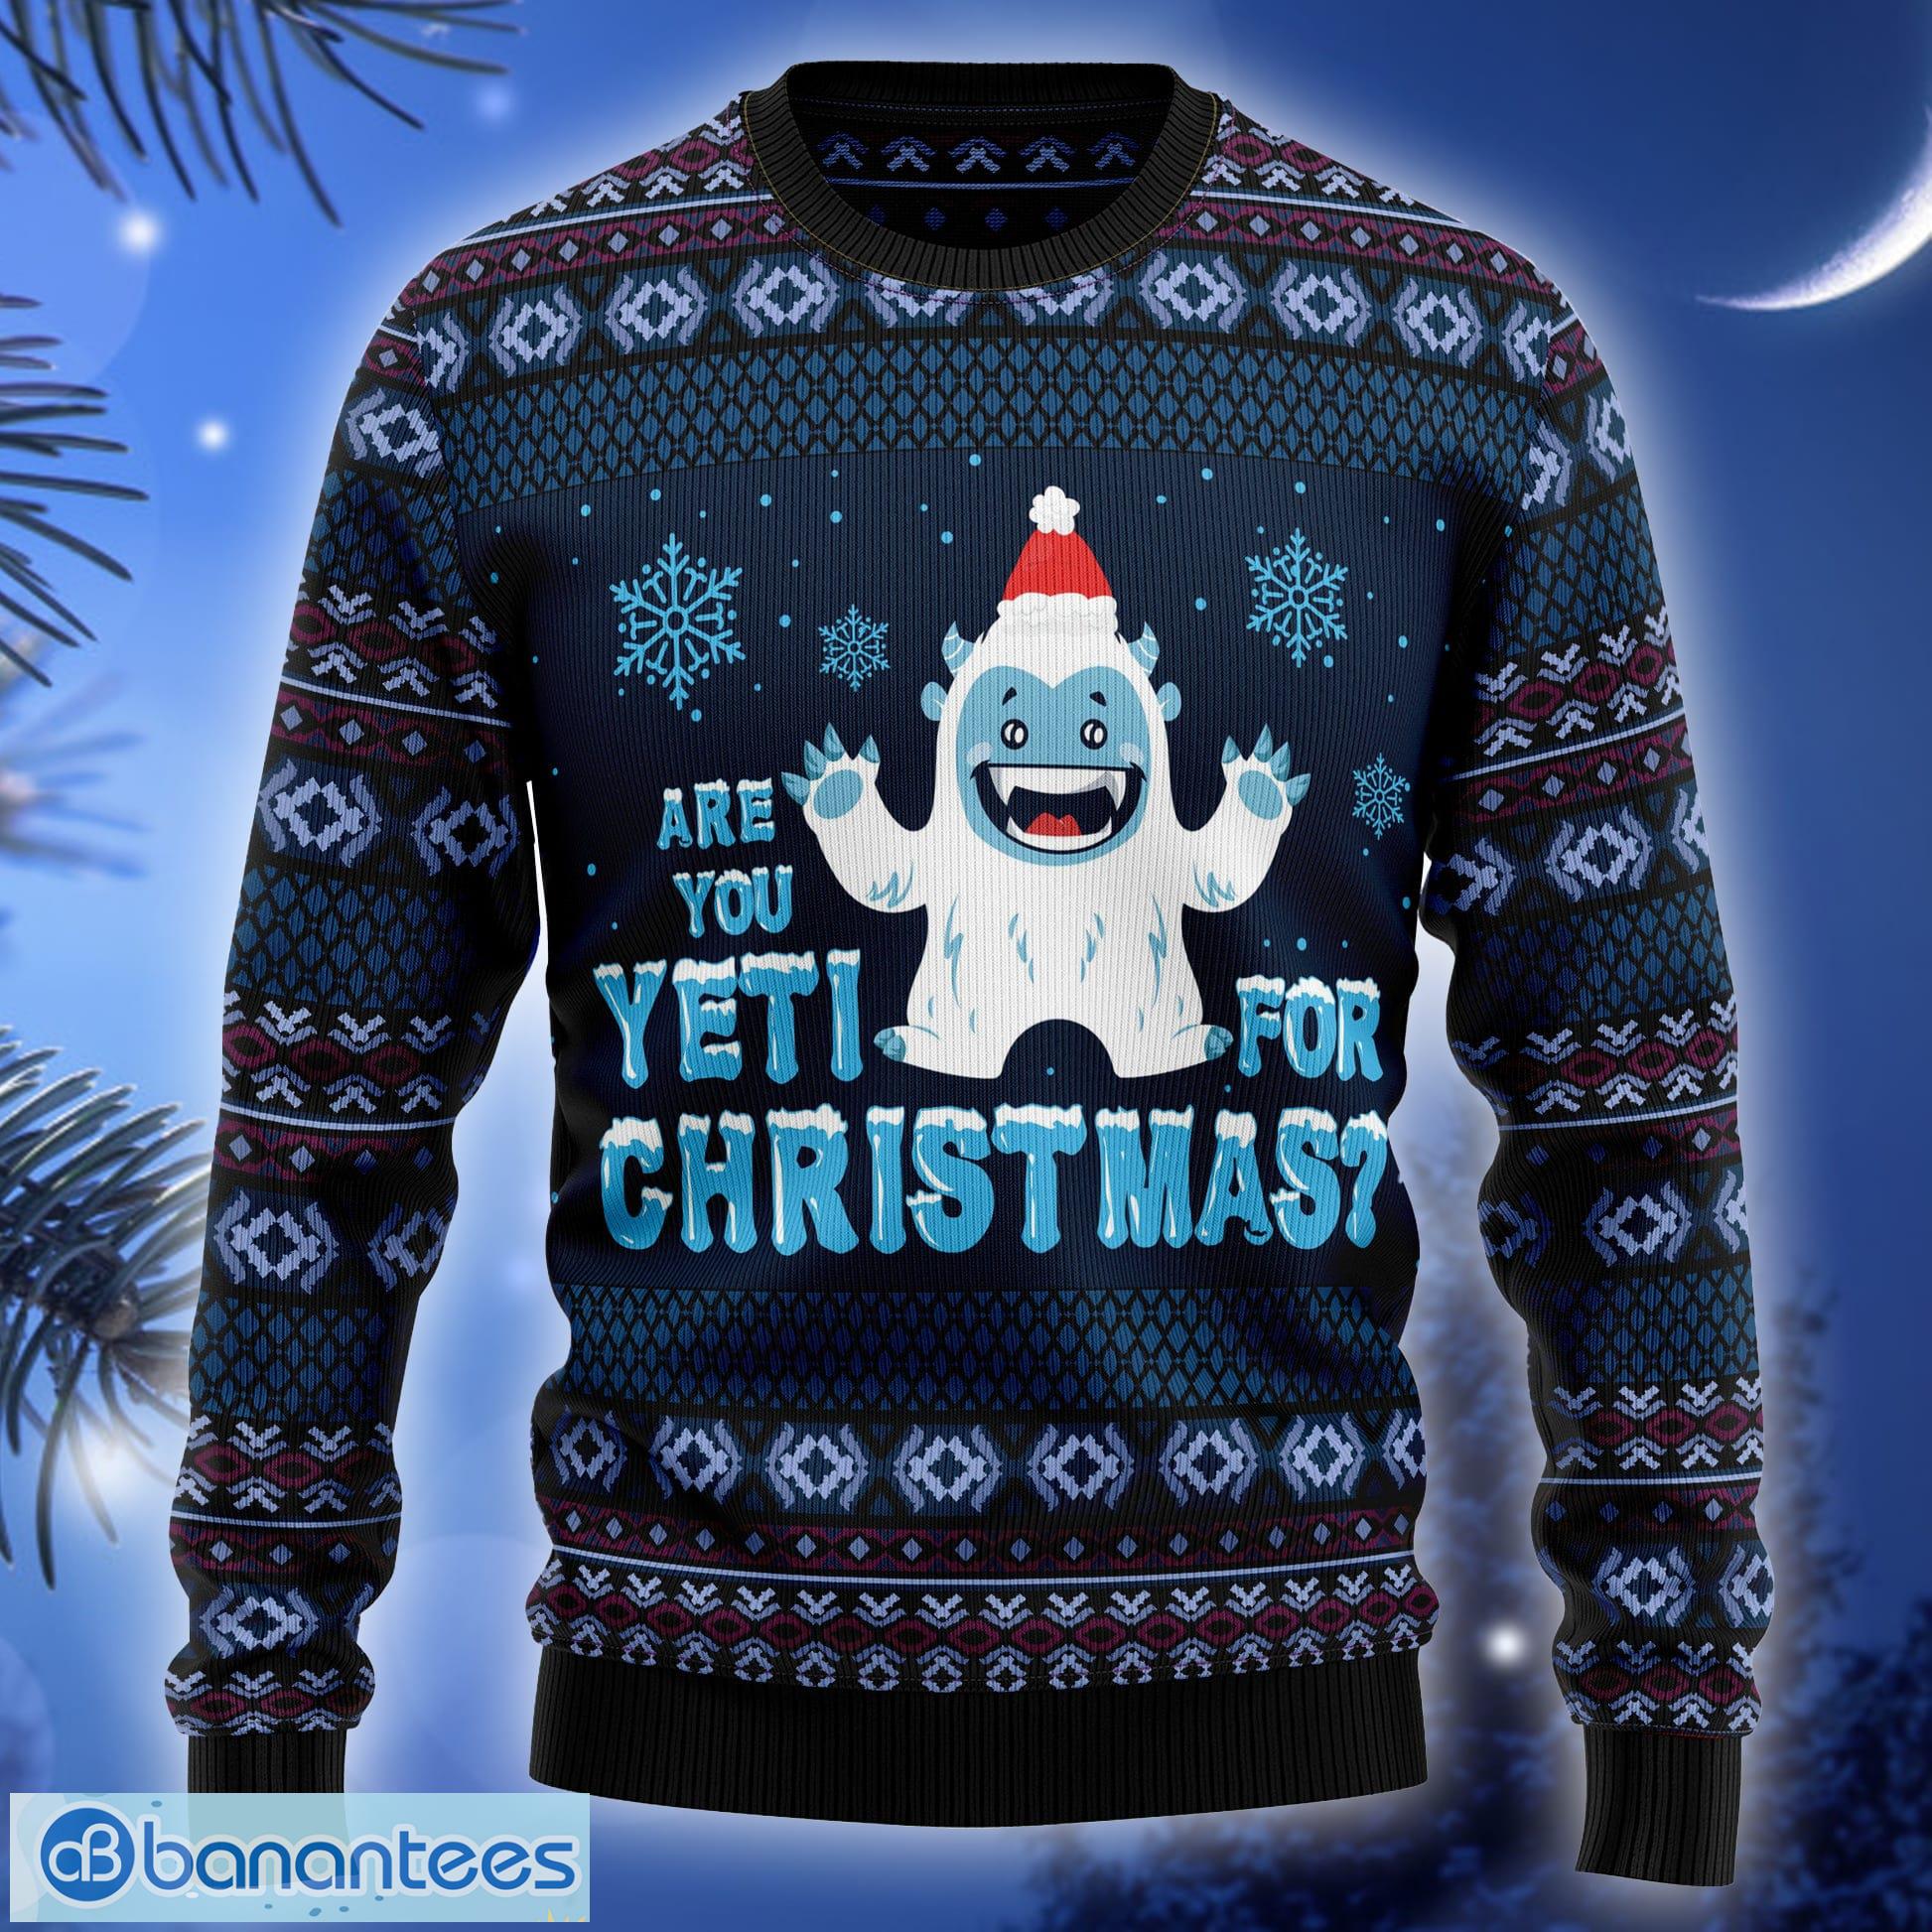 https://image.banantees.com/2023-08/are-you-yeti-for-ugly-christmas-sweater-thankgiving-gift-men-women.jpg